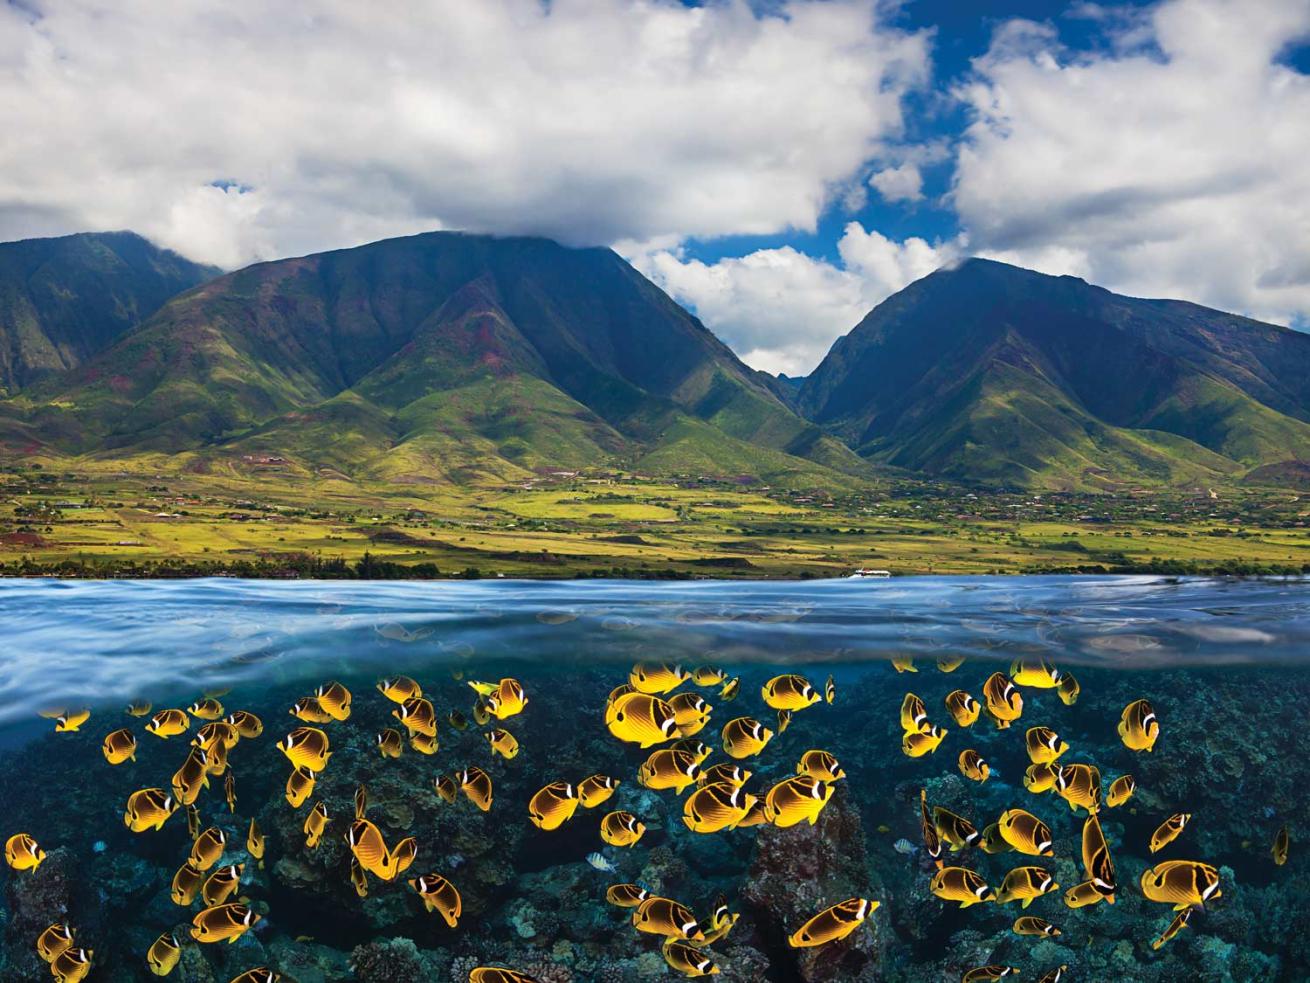 Racoon butterfly-fish and Maui mountains